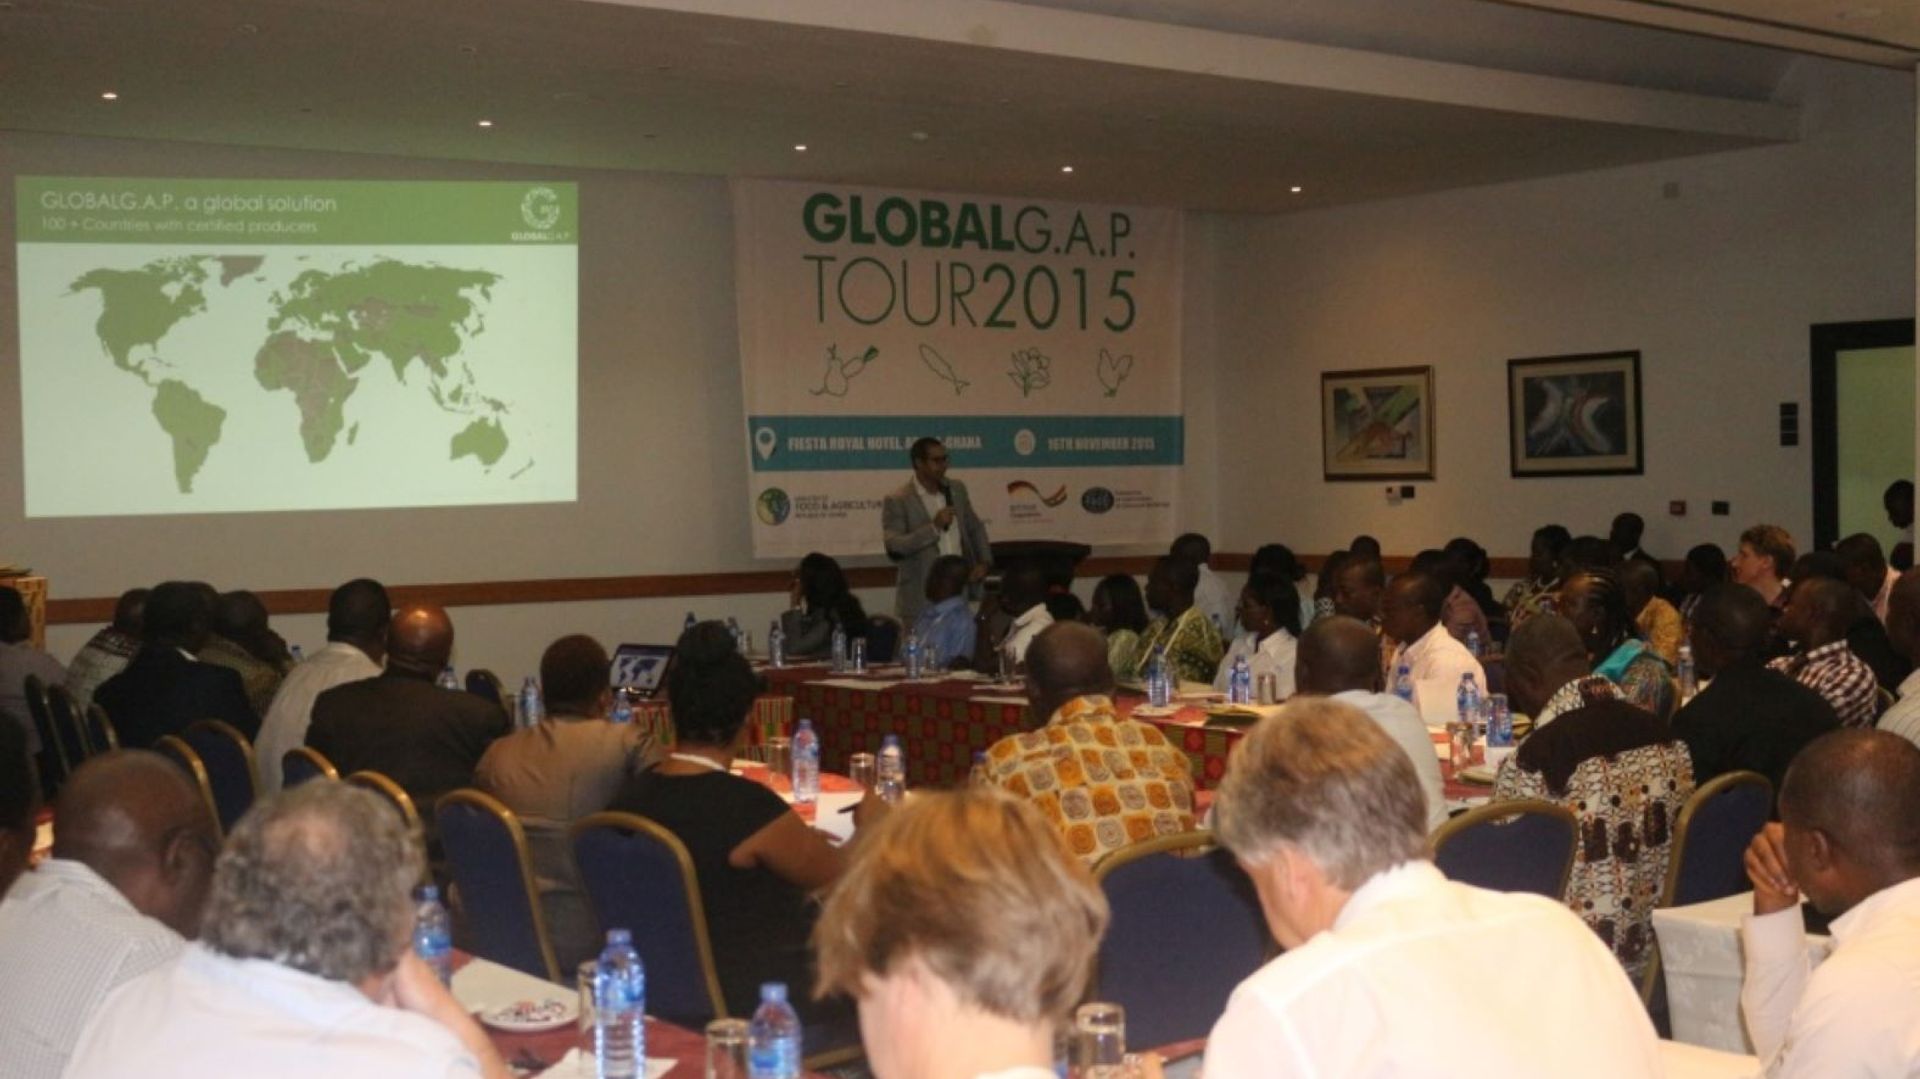 Image of a presentation at the 2015 TOUR stop in Ghana